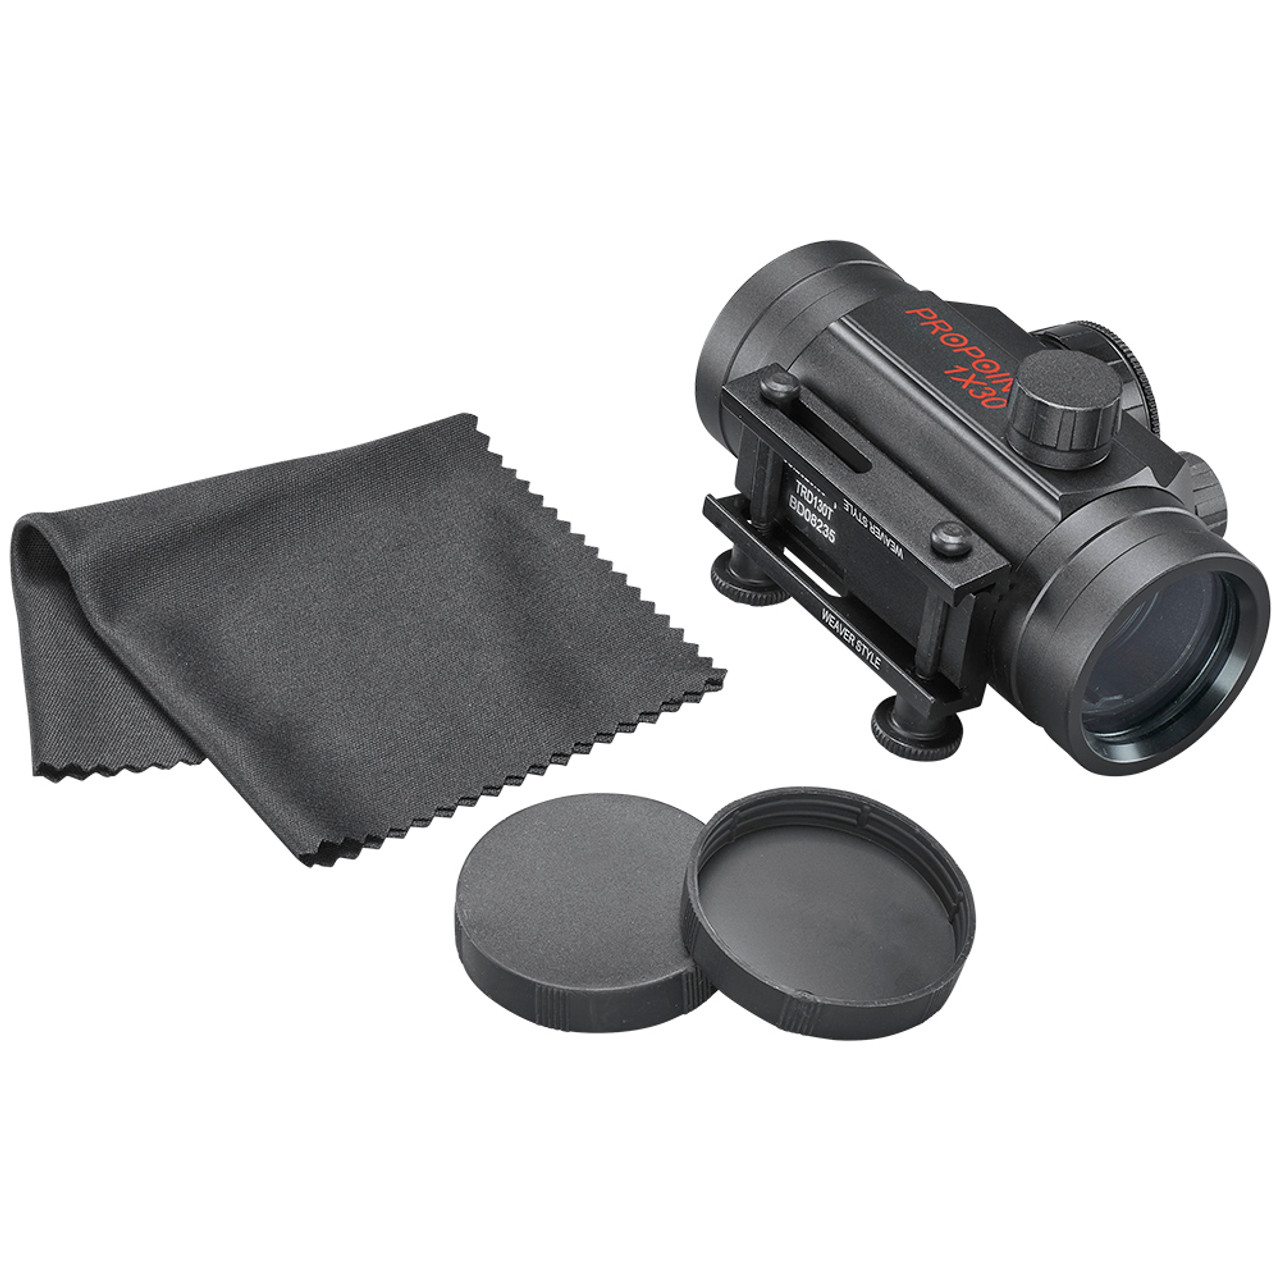 ProPointÂ 1x30mm Fixed Magnification Red DotÂ Sight